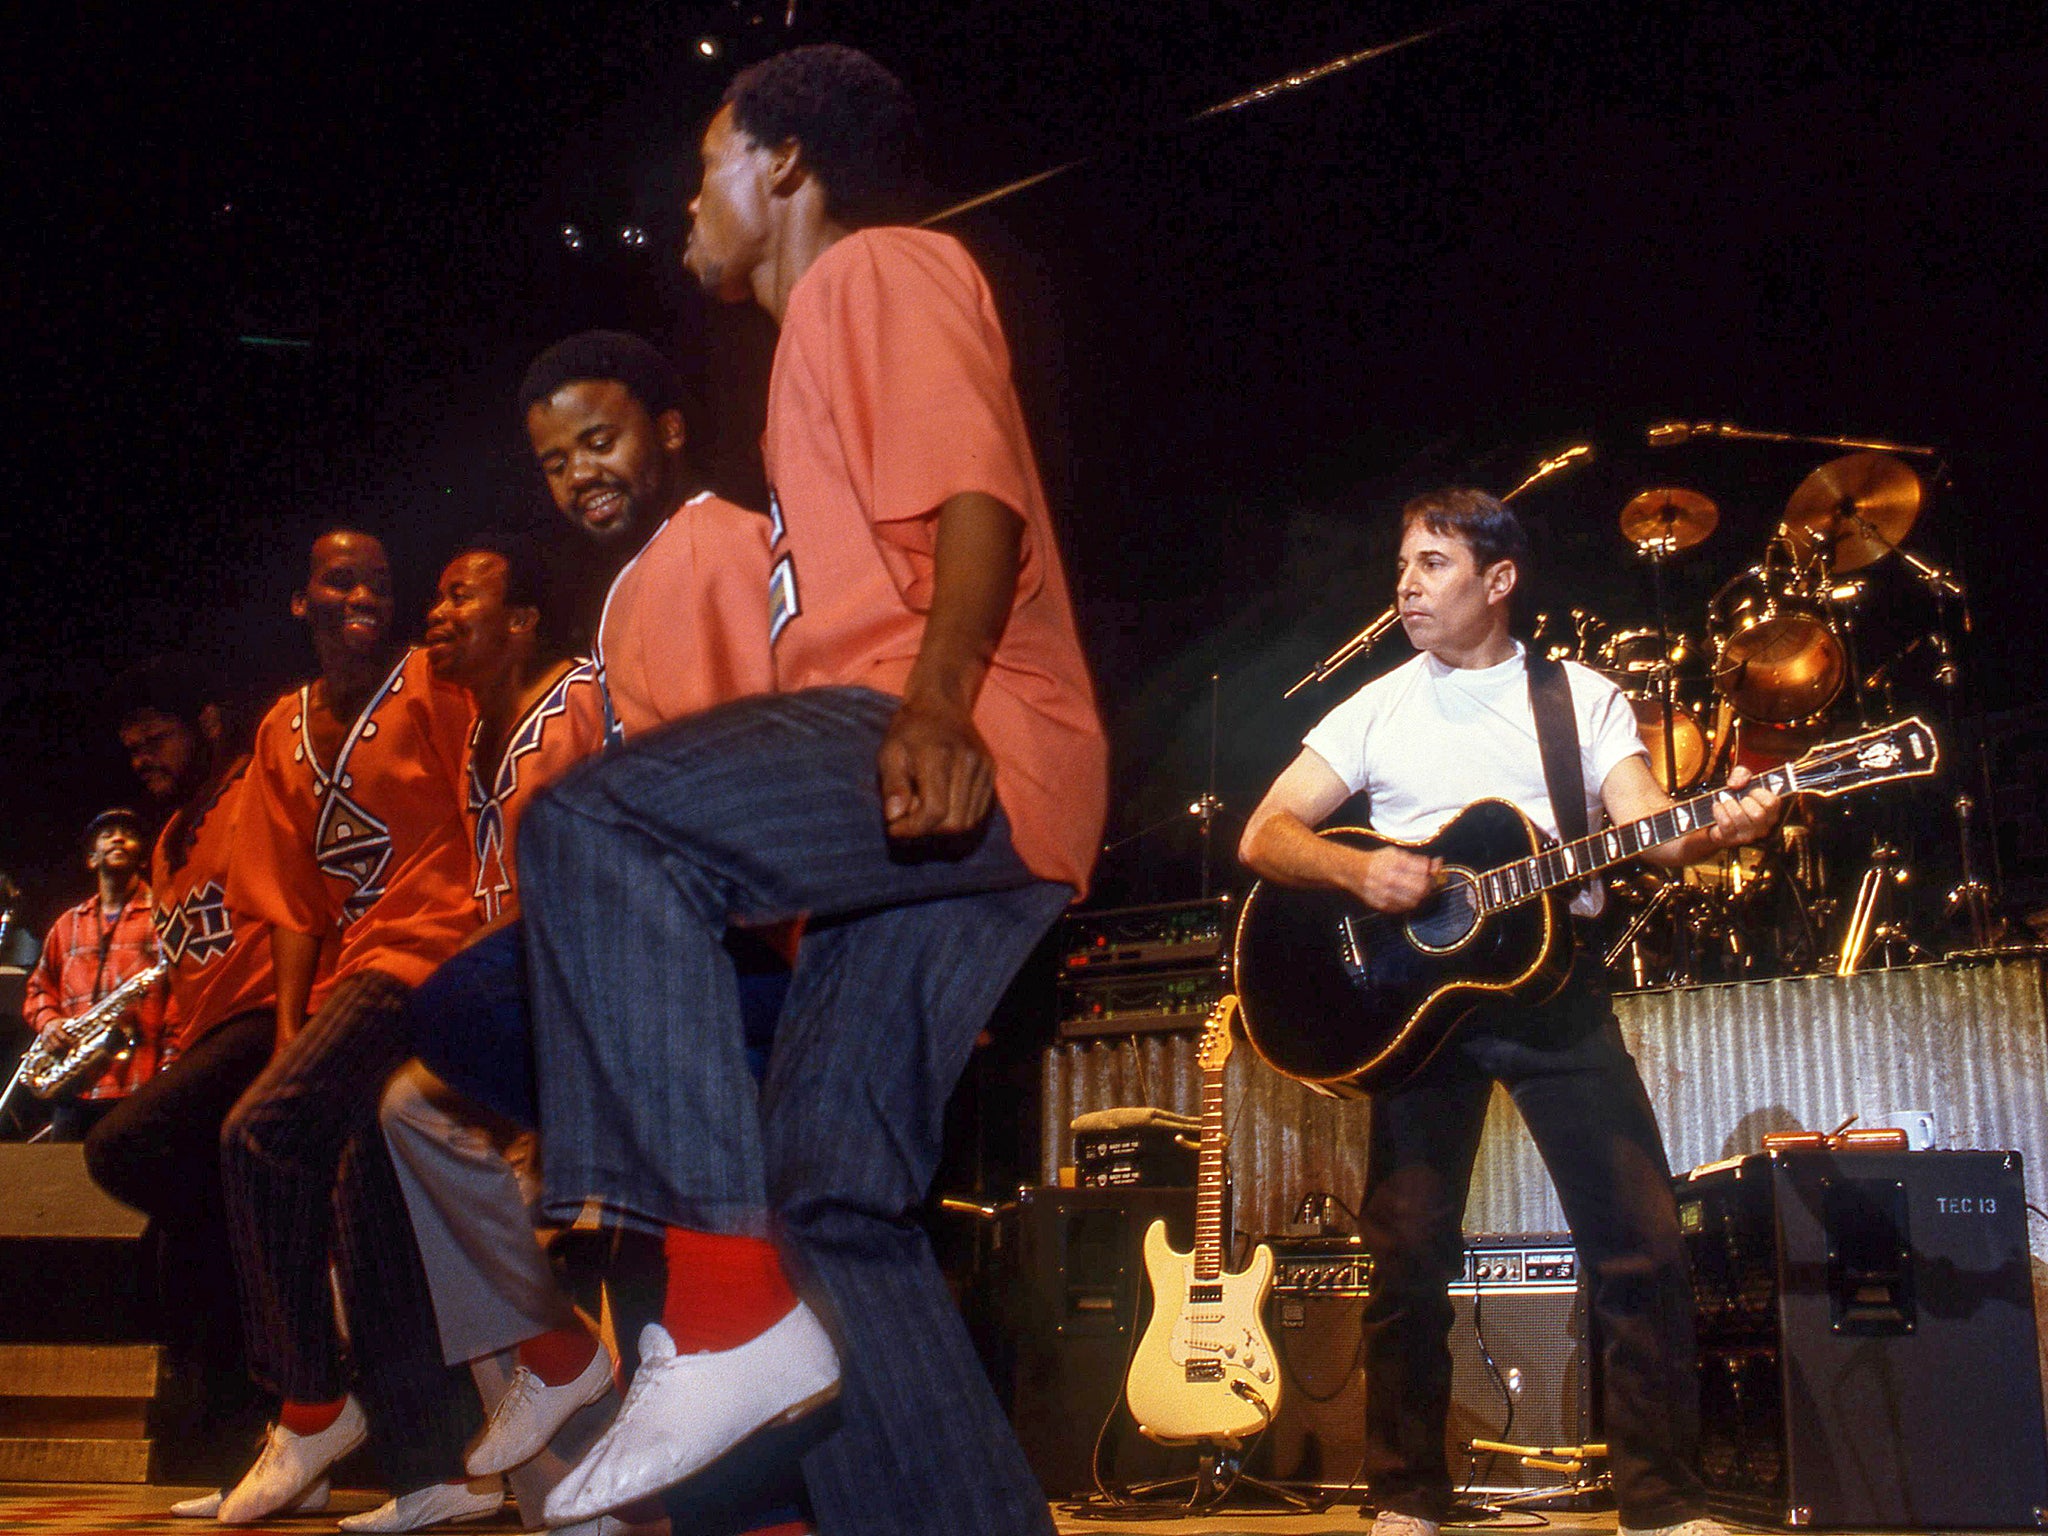 Paul Simon on stage with Ladysmith Black Mambazo in London in 1987